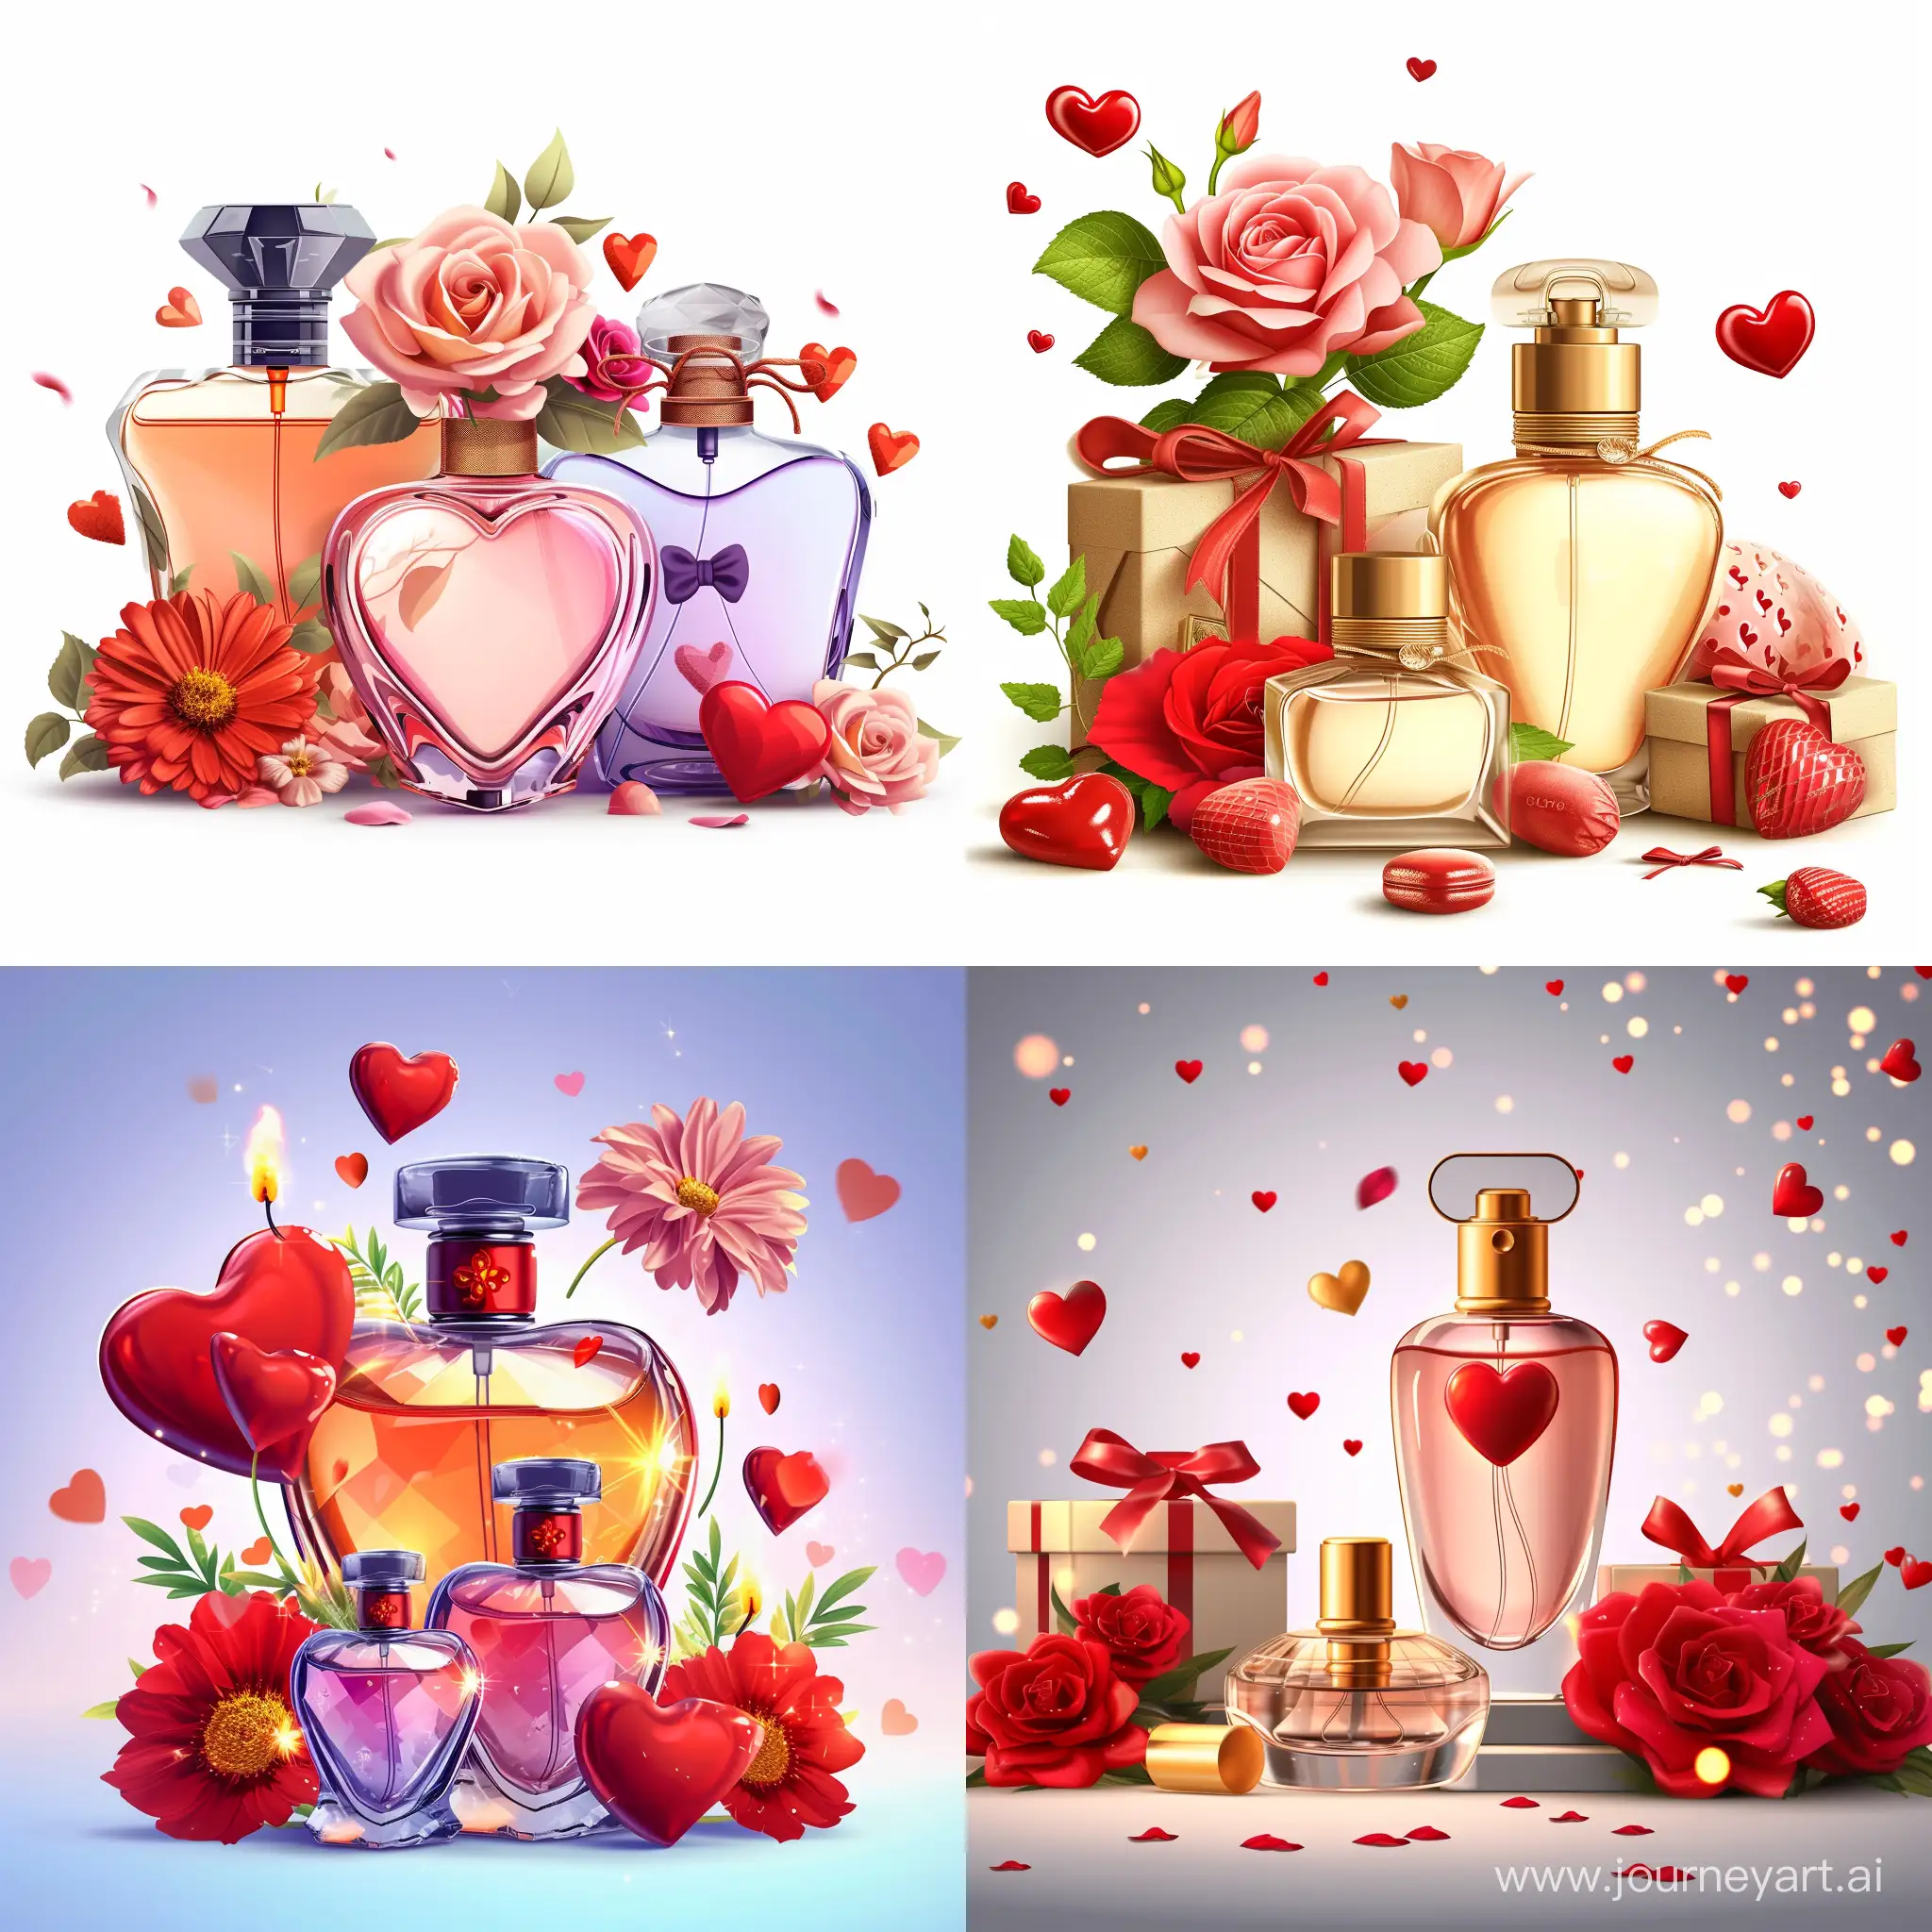 Valentines-Day-Celebration-with-Floral-Perfume-Bottles-and-Gifts